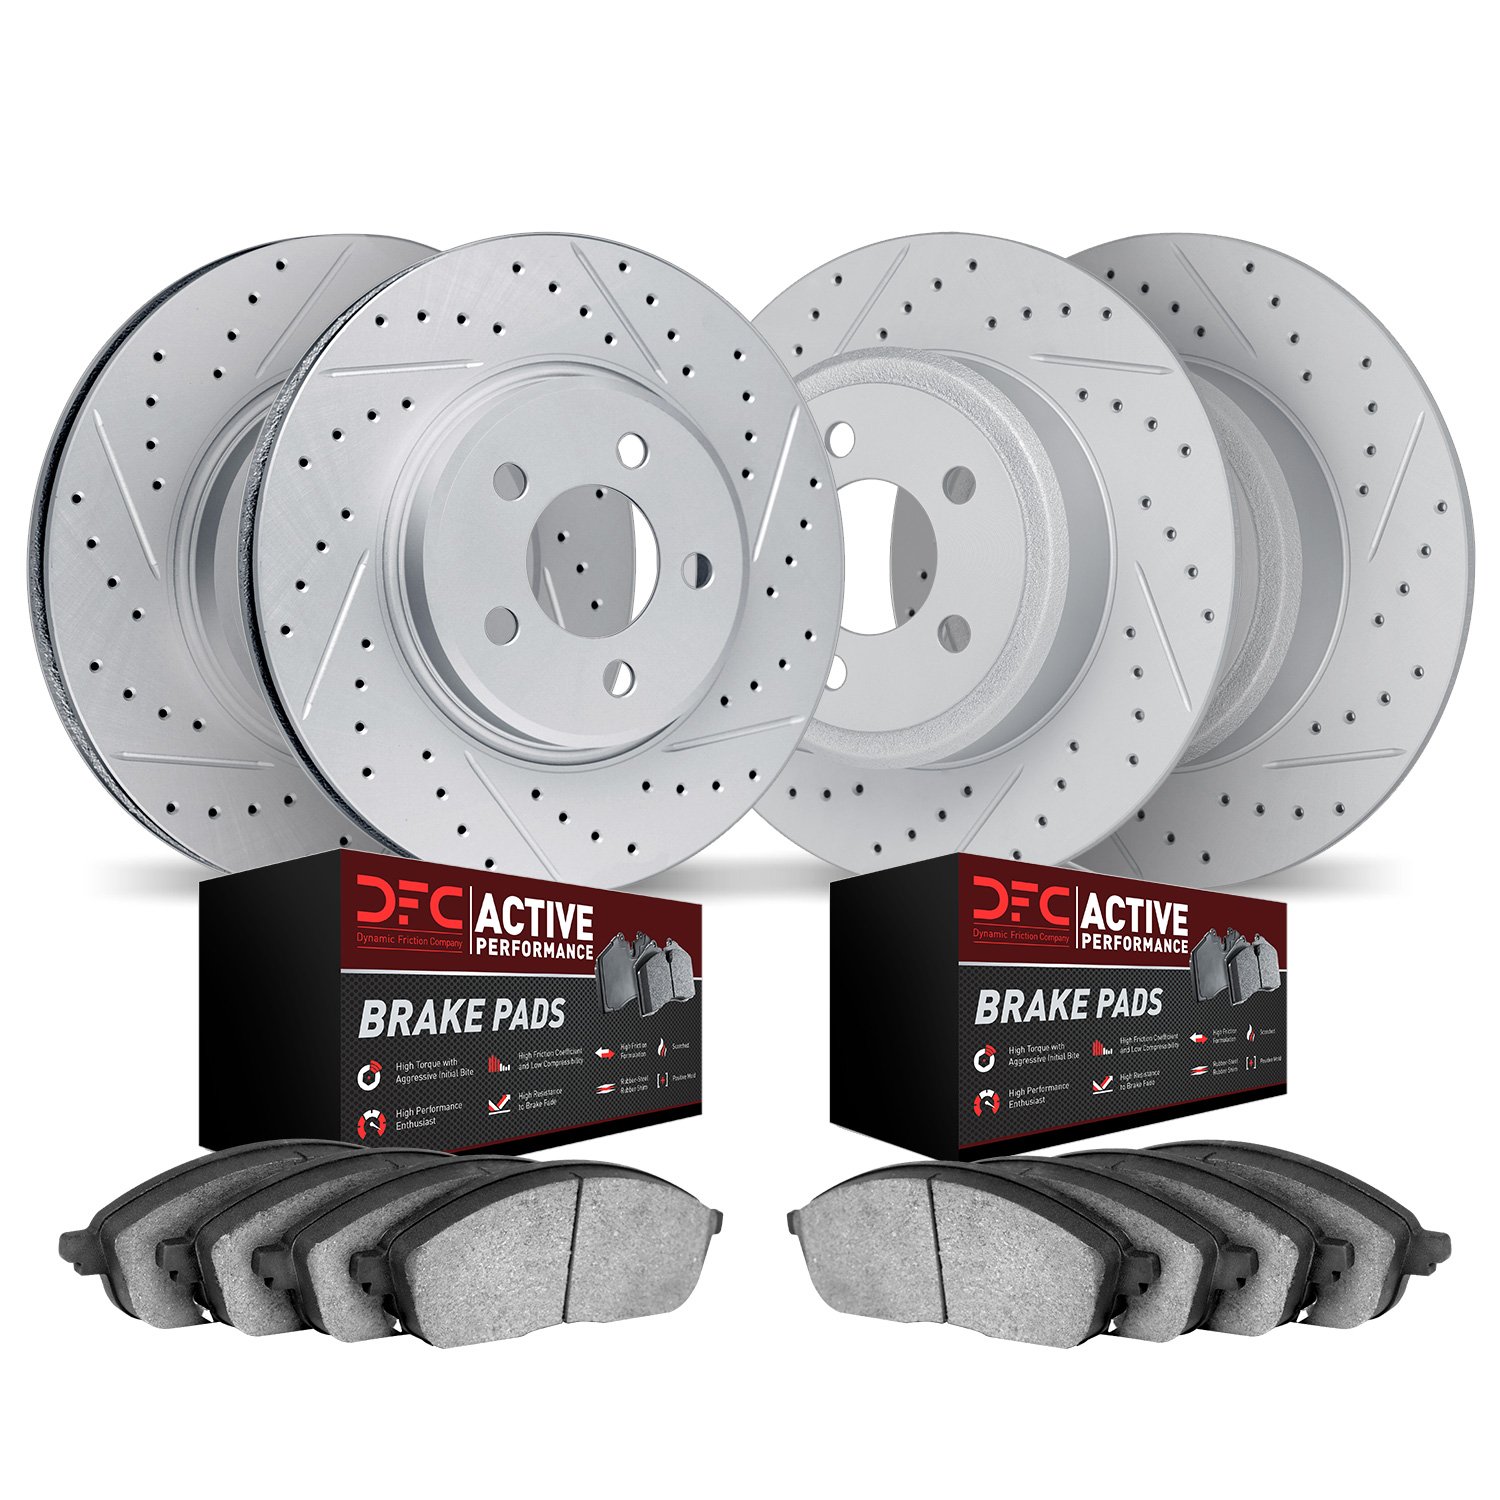 2704-74014 Geoperformance Drilled/Slotted Brake Rotors with Active Performance Pads Kit, 2006-2010 Audi/Volkswagen, Position: Fr